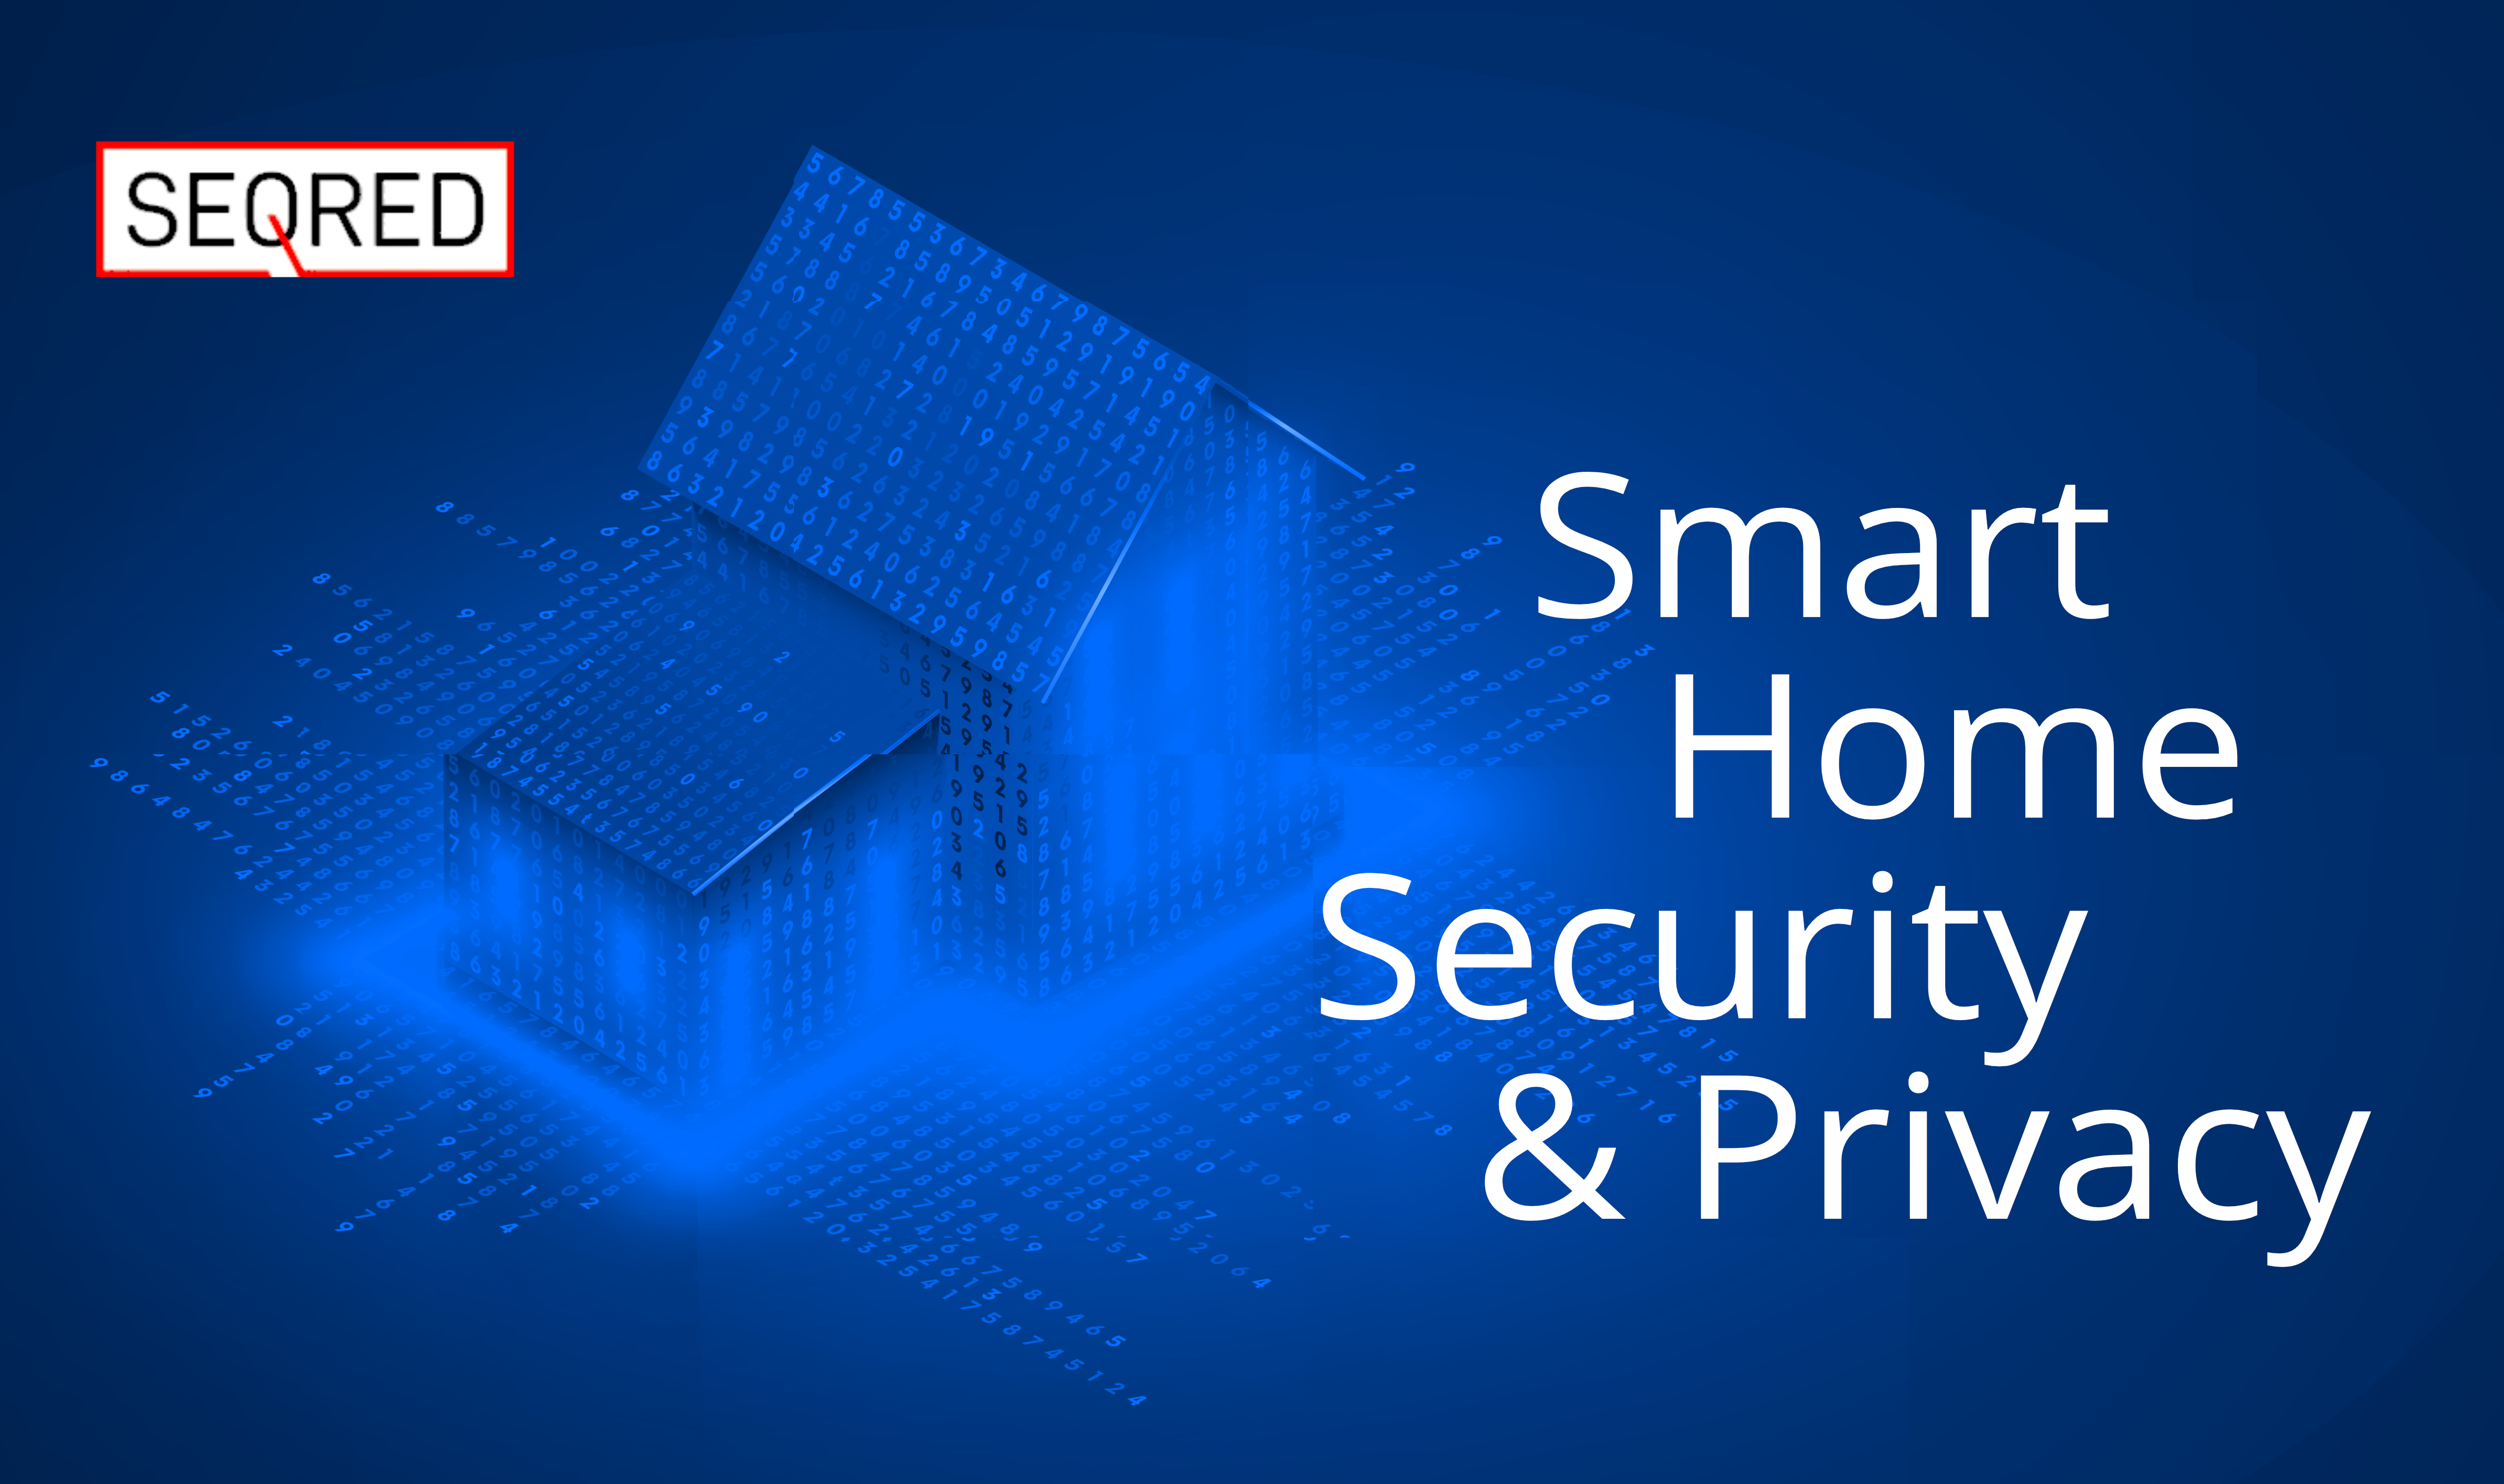 Smart Home Security & Privacy